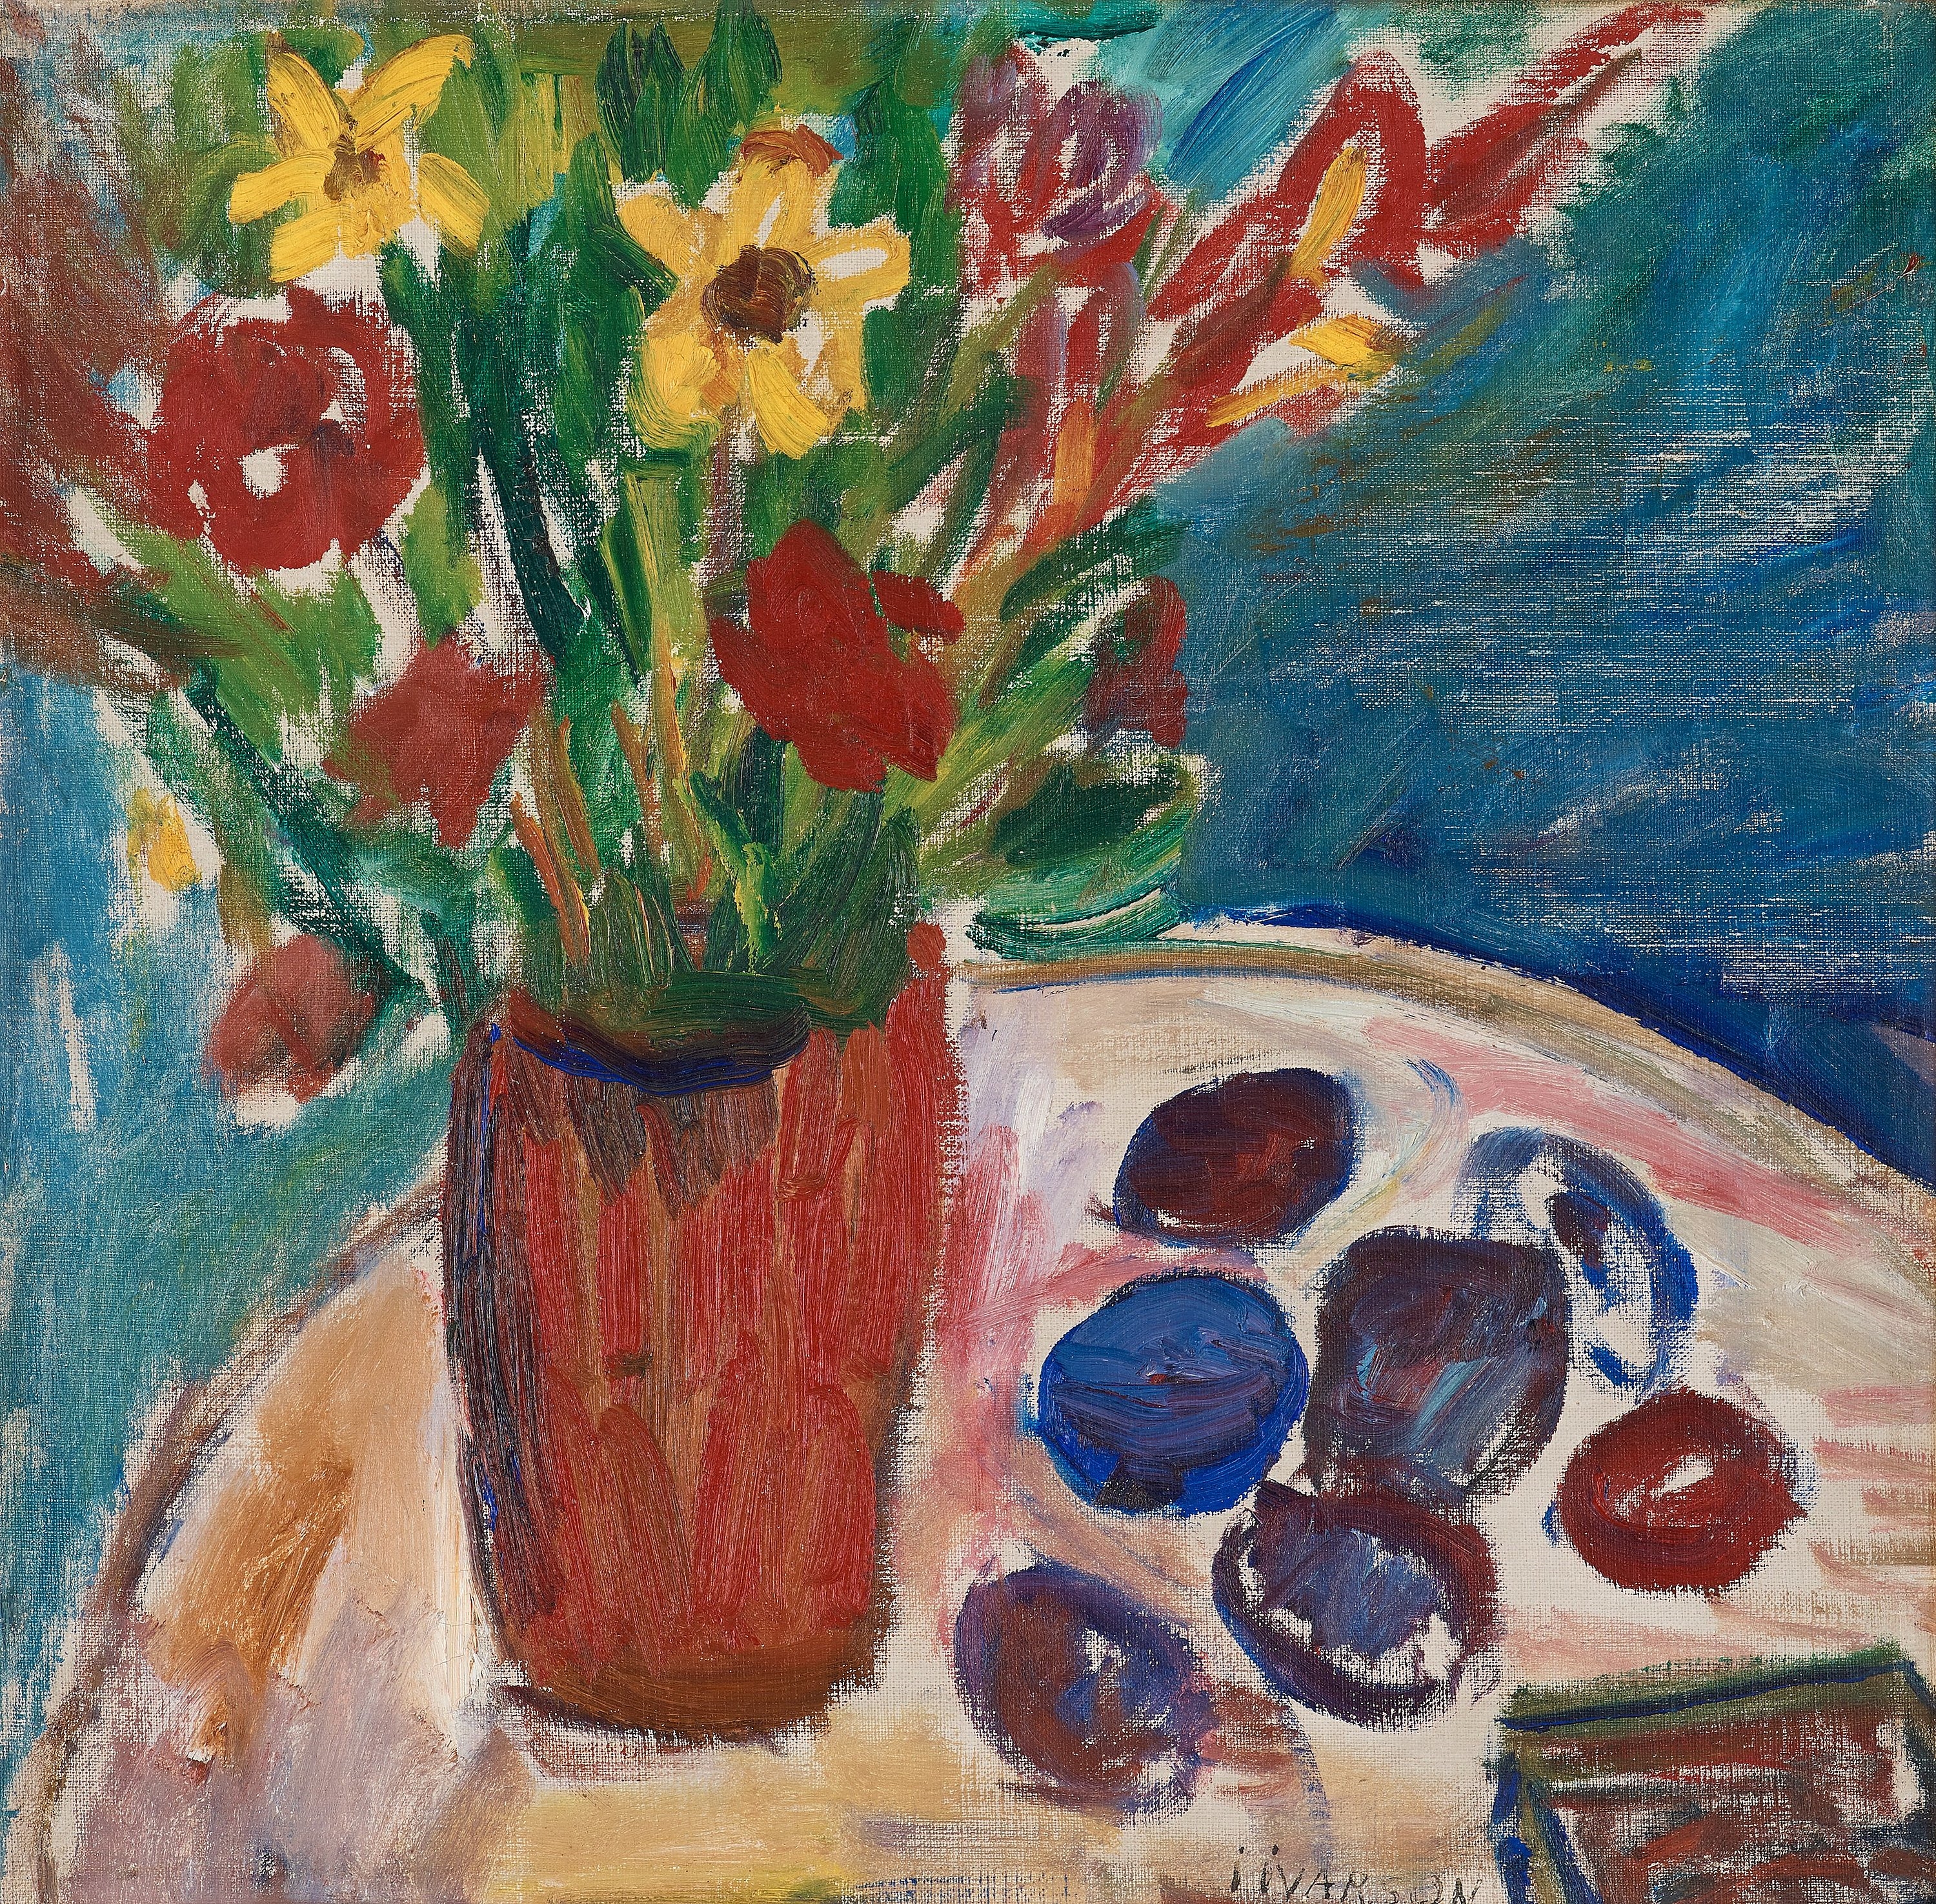 Still life with flowers and plums